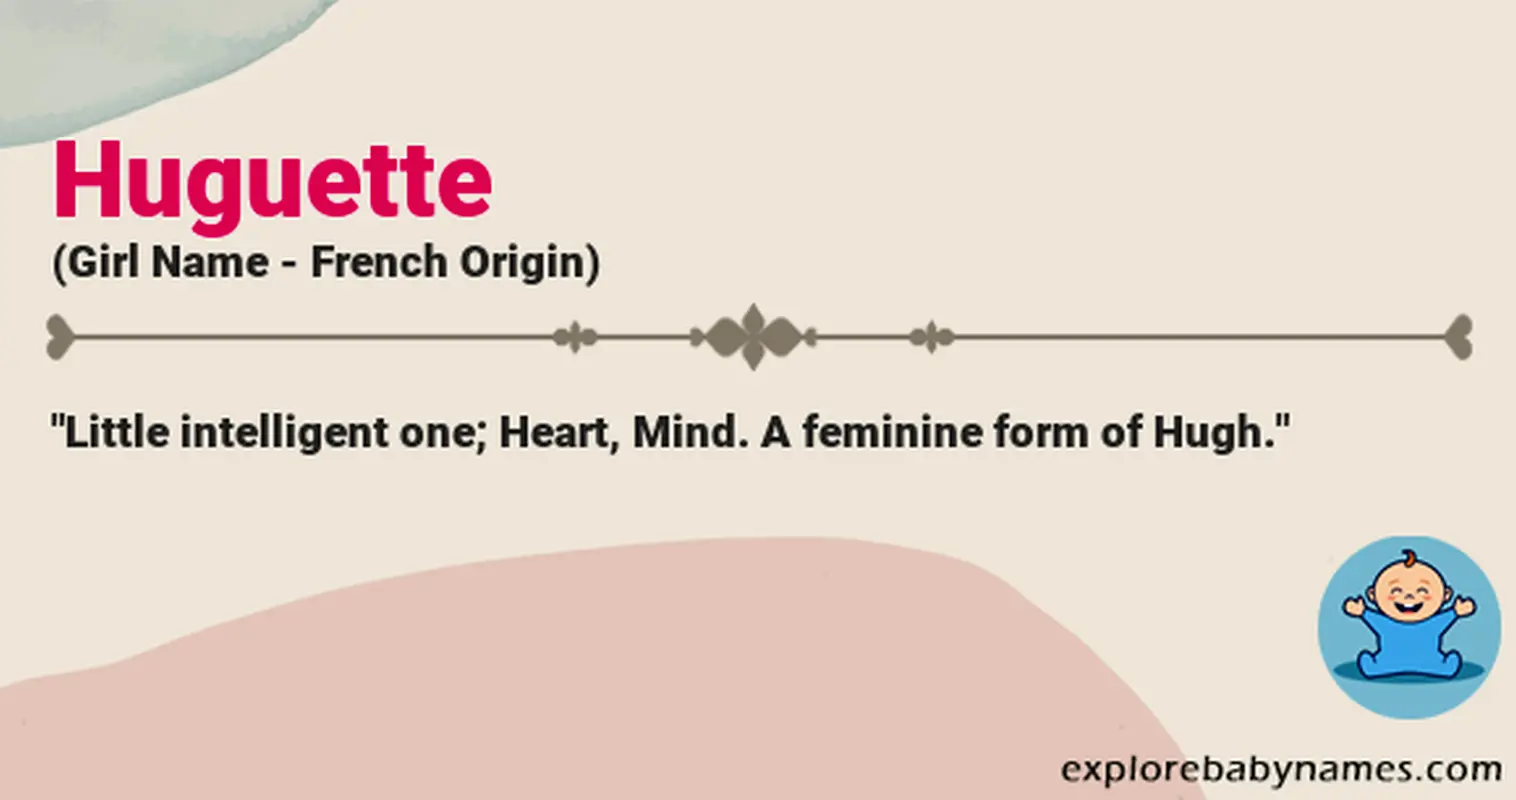 Meaning of Huguette